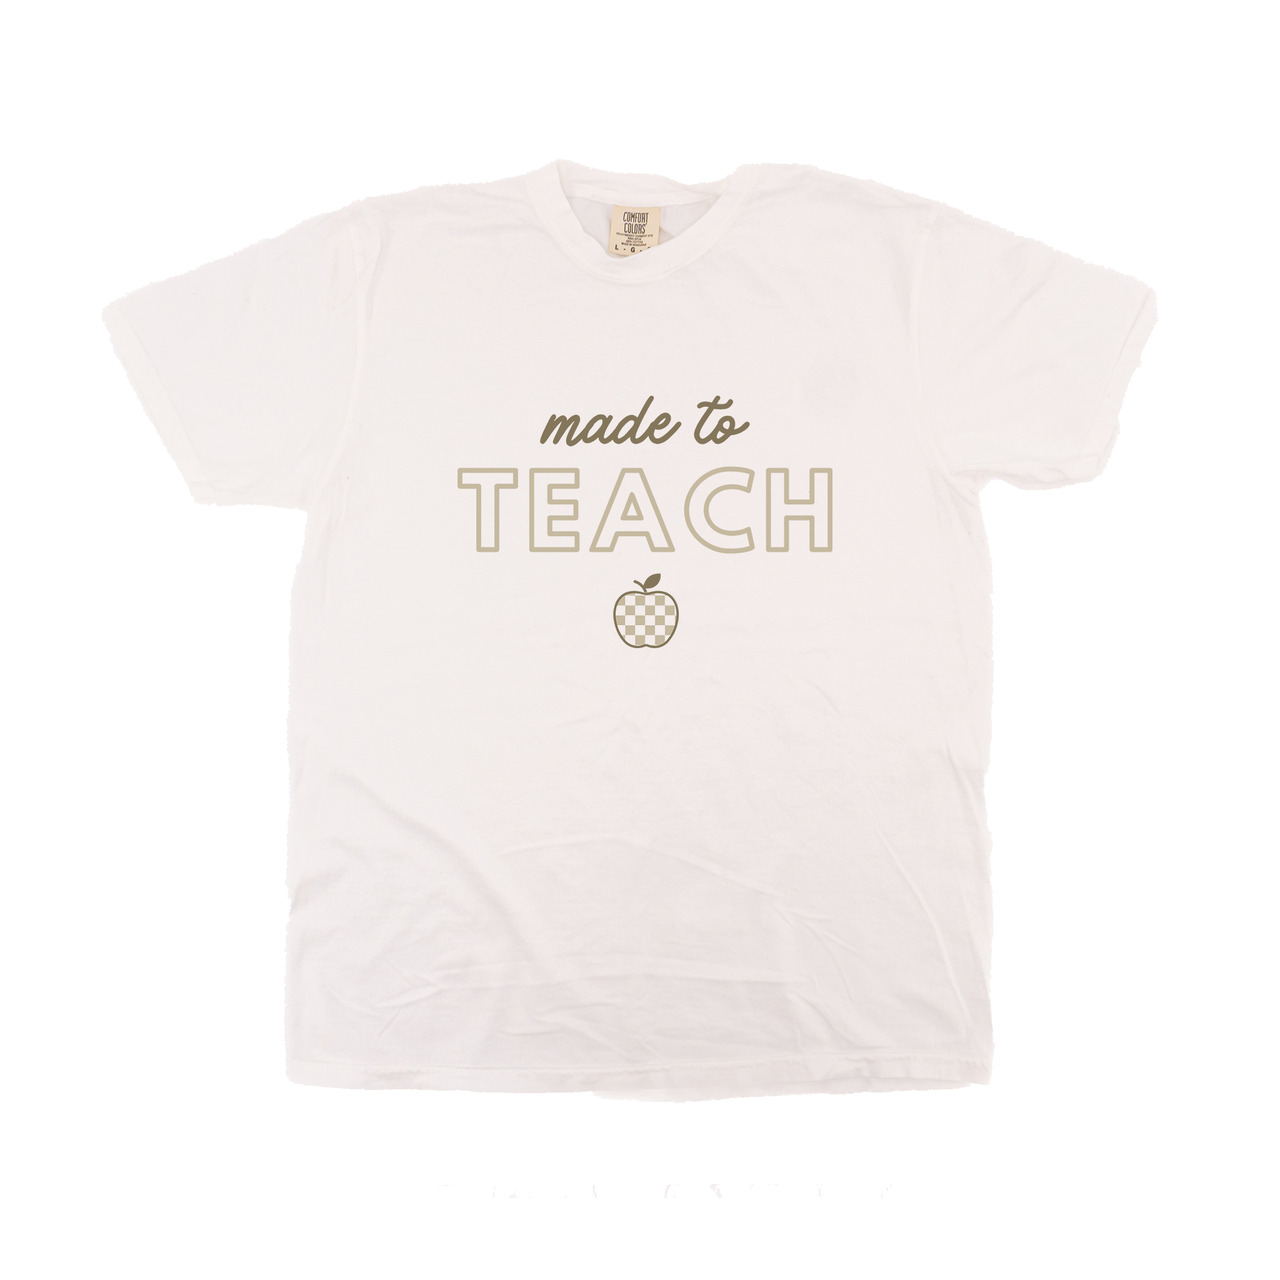 Made to Teach - Tee (Vintage White, Short Sleeve)